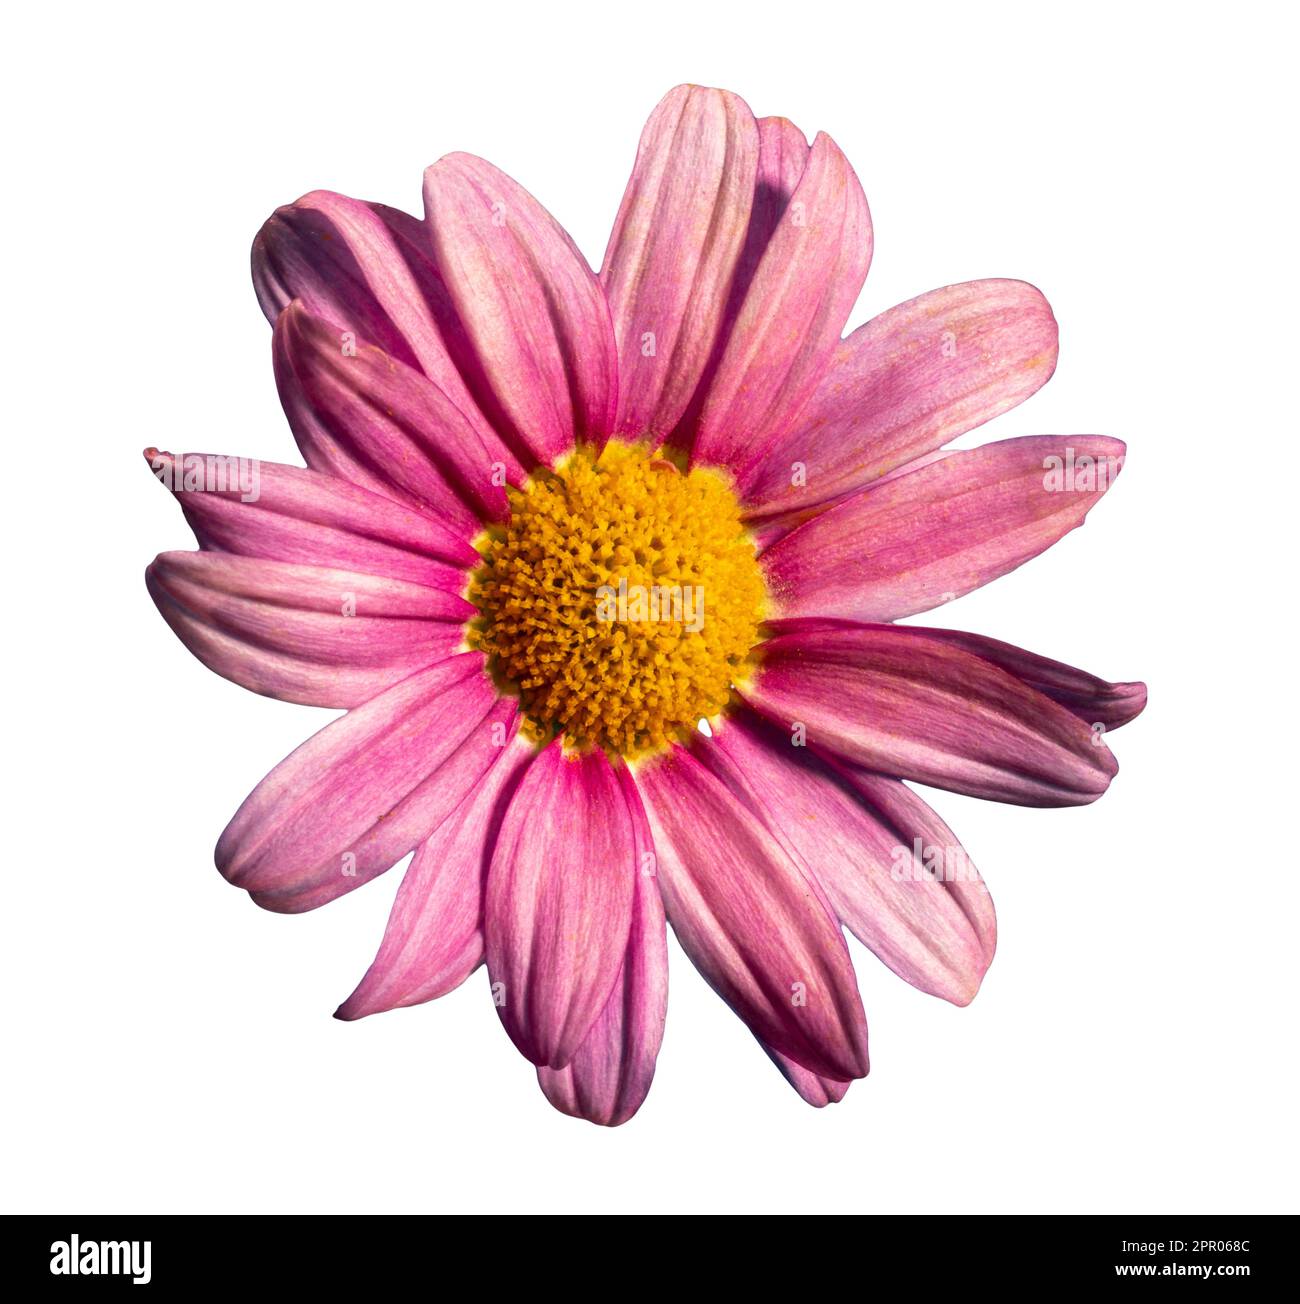 Daisy with pink petals isolated on white with clipping path included Stock Photo